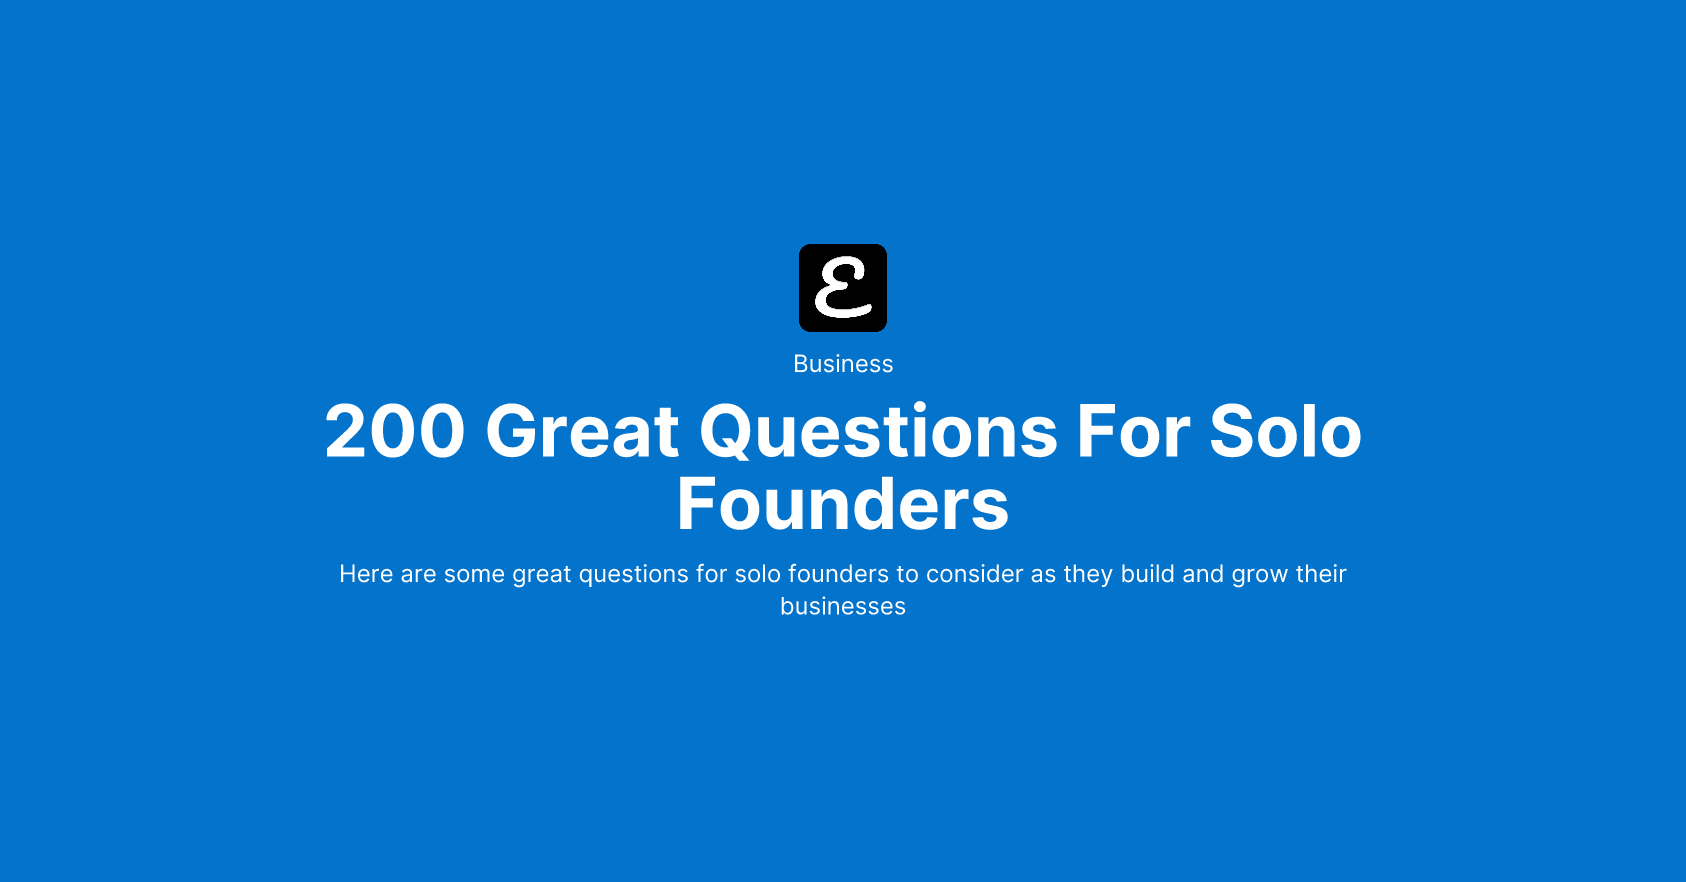 200 Great Questions For Solo Founders by Eric David Smith